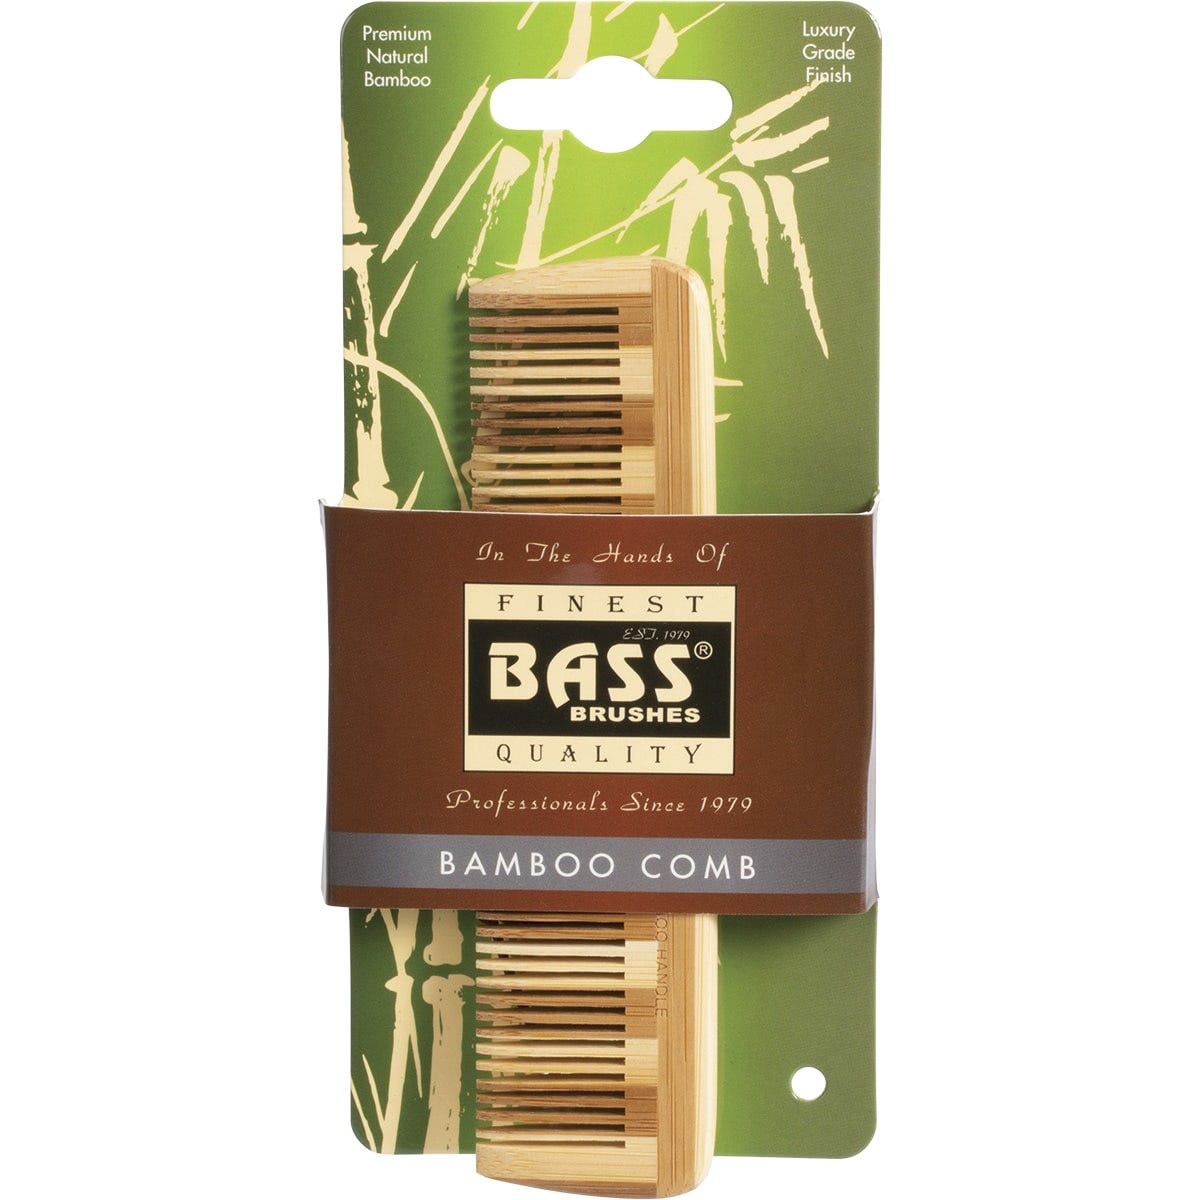 Bamboo Comb Pocket Size Fine Tooth